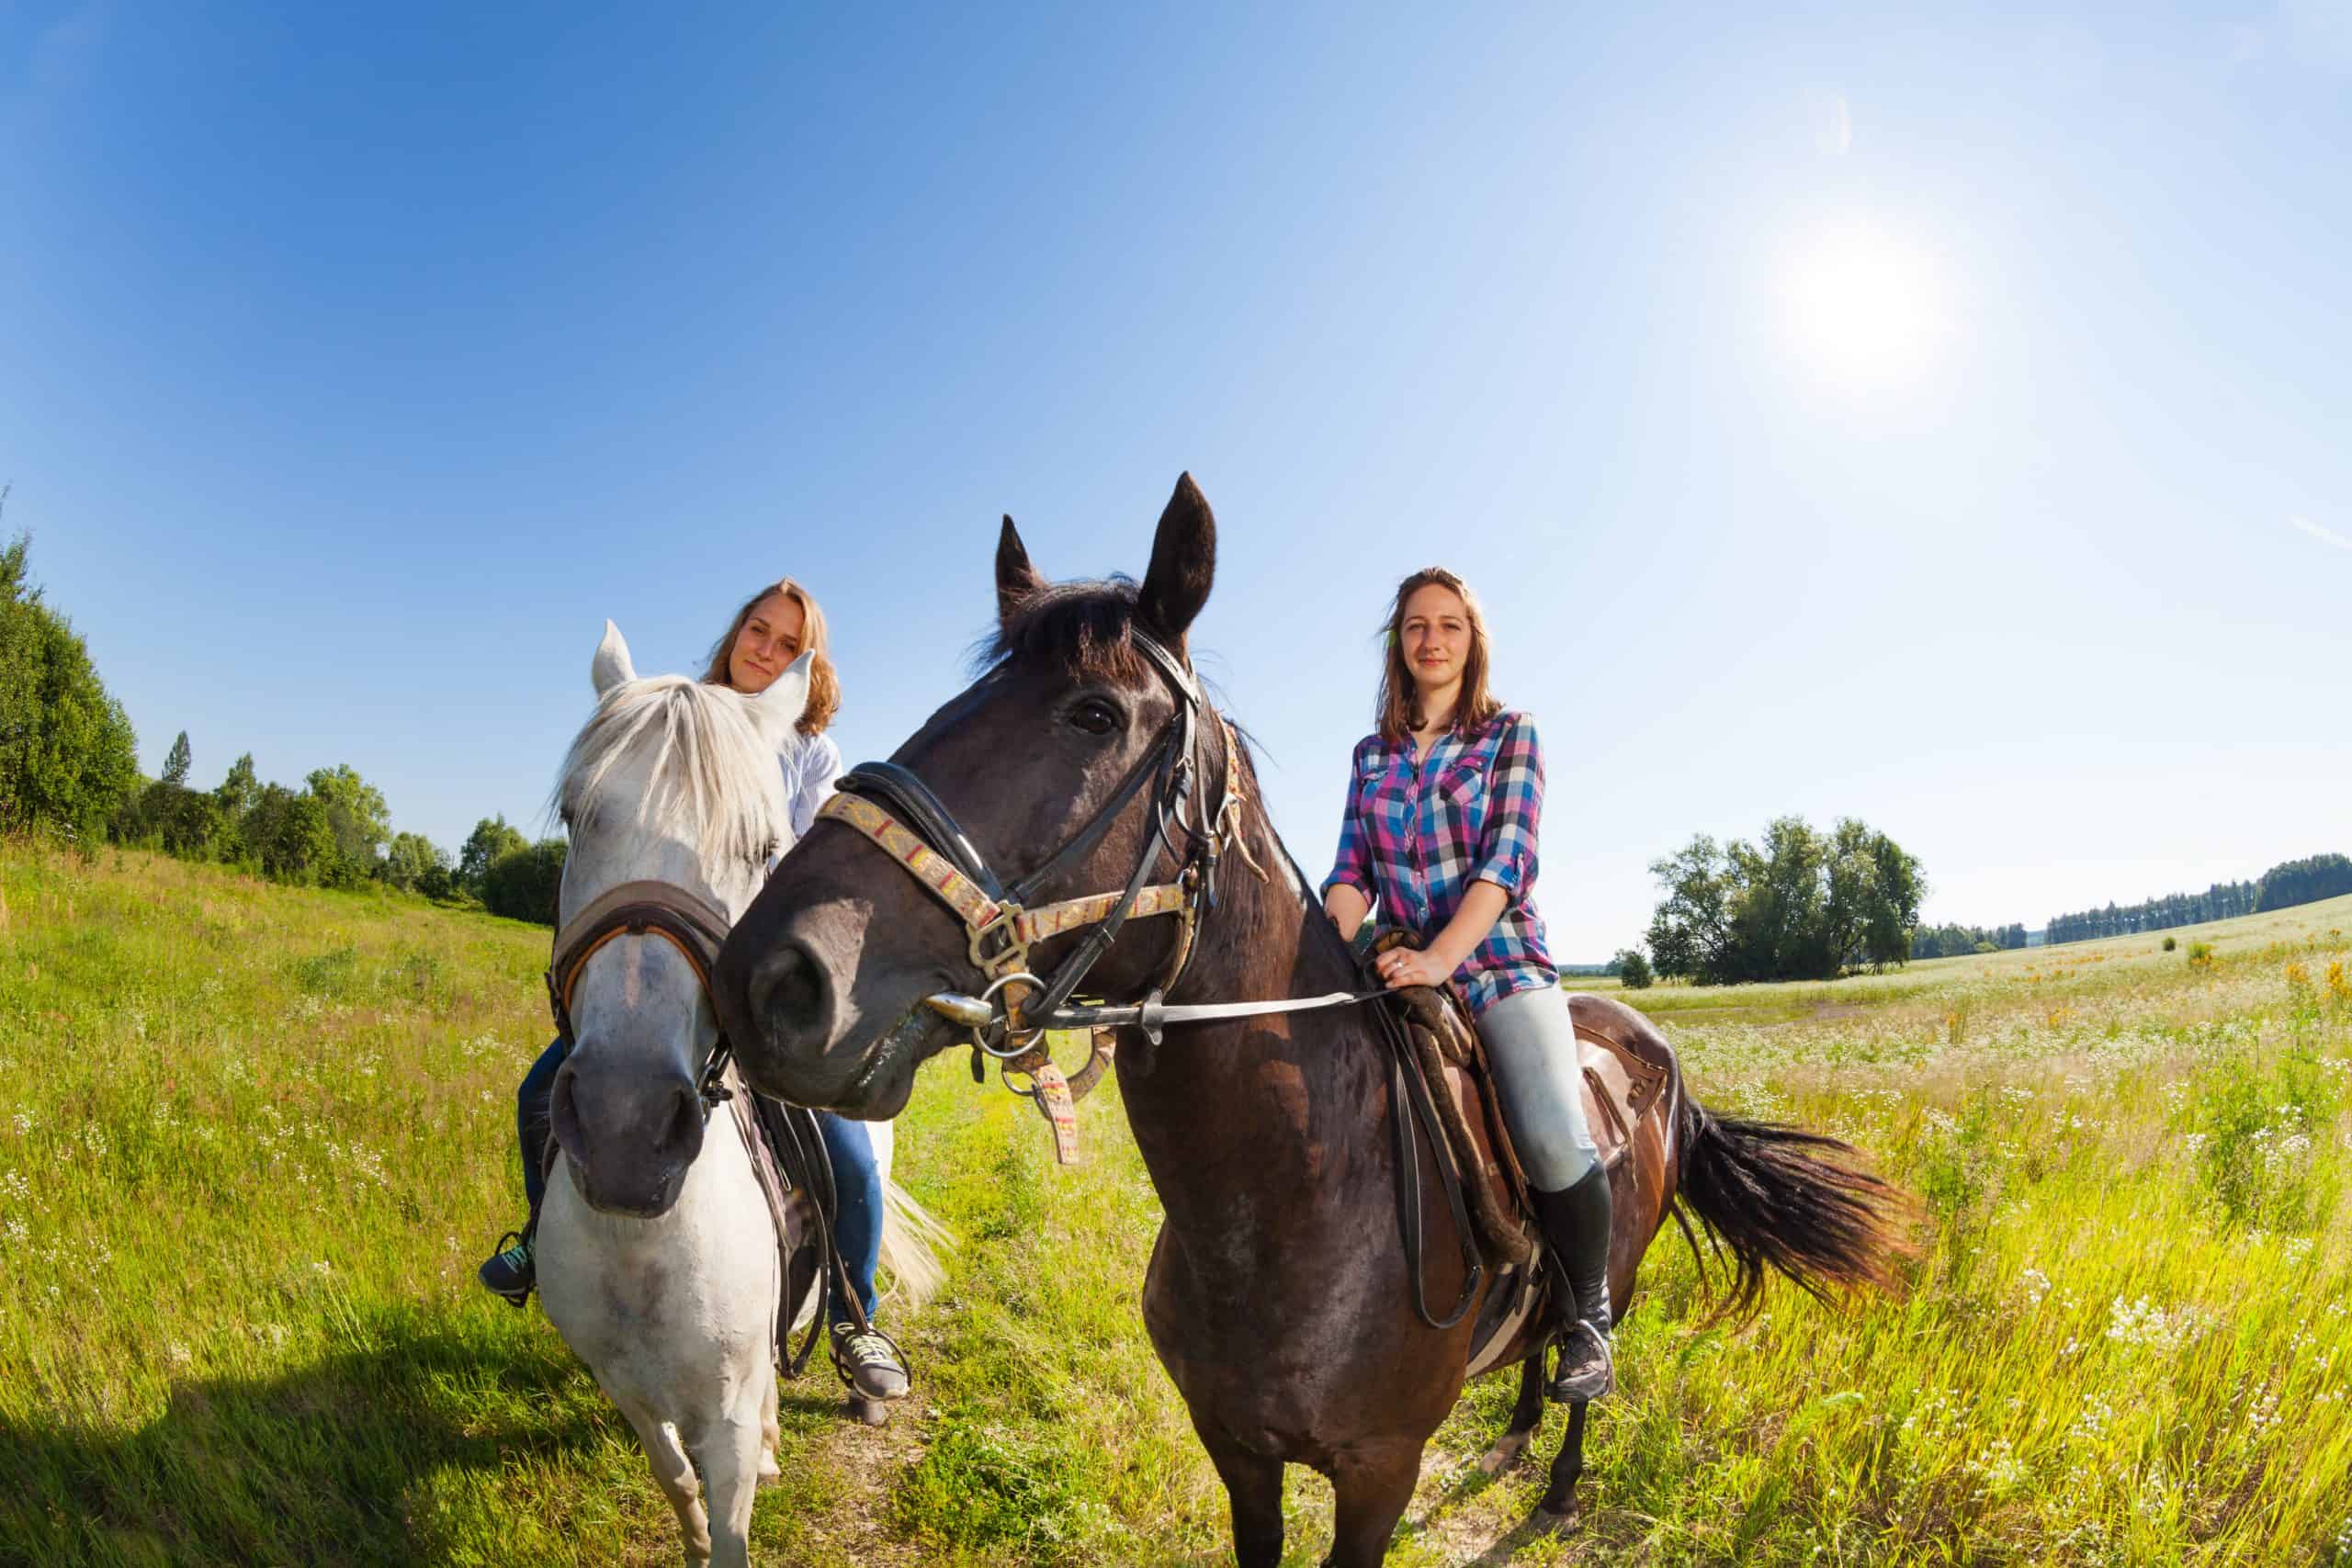 Two female horseback riders mounted on their purebred horses at summer field